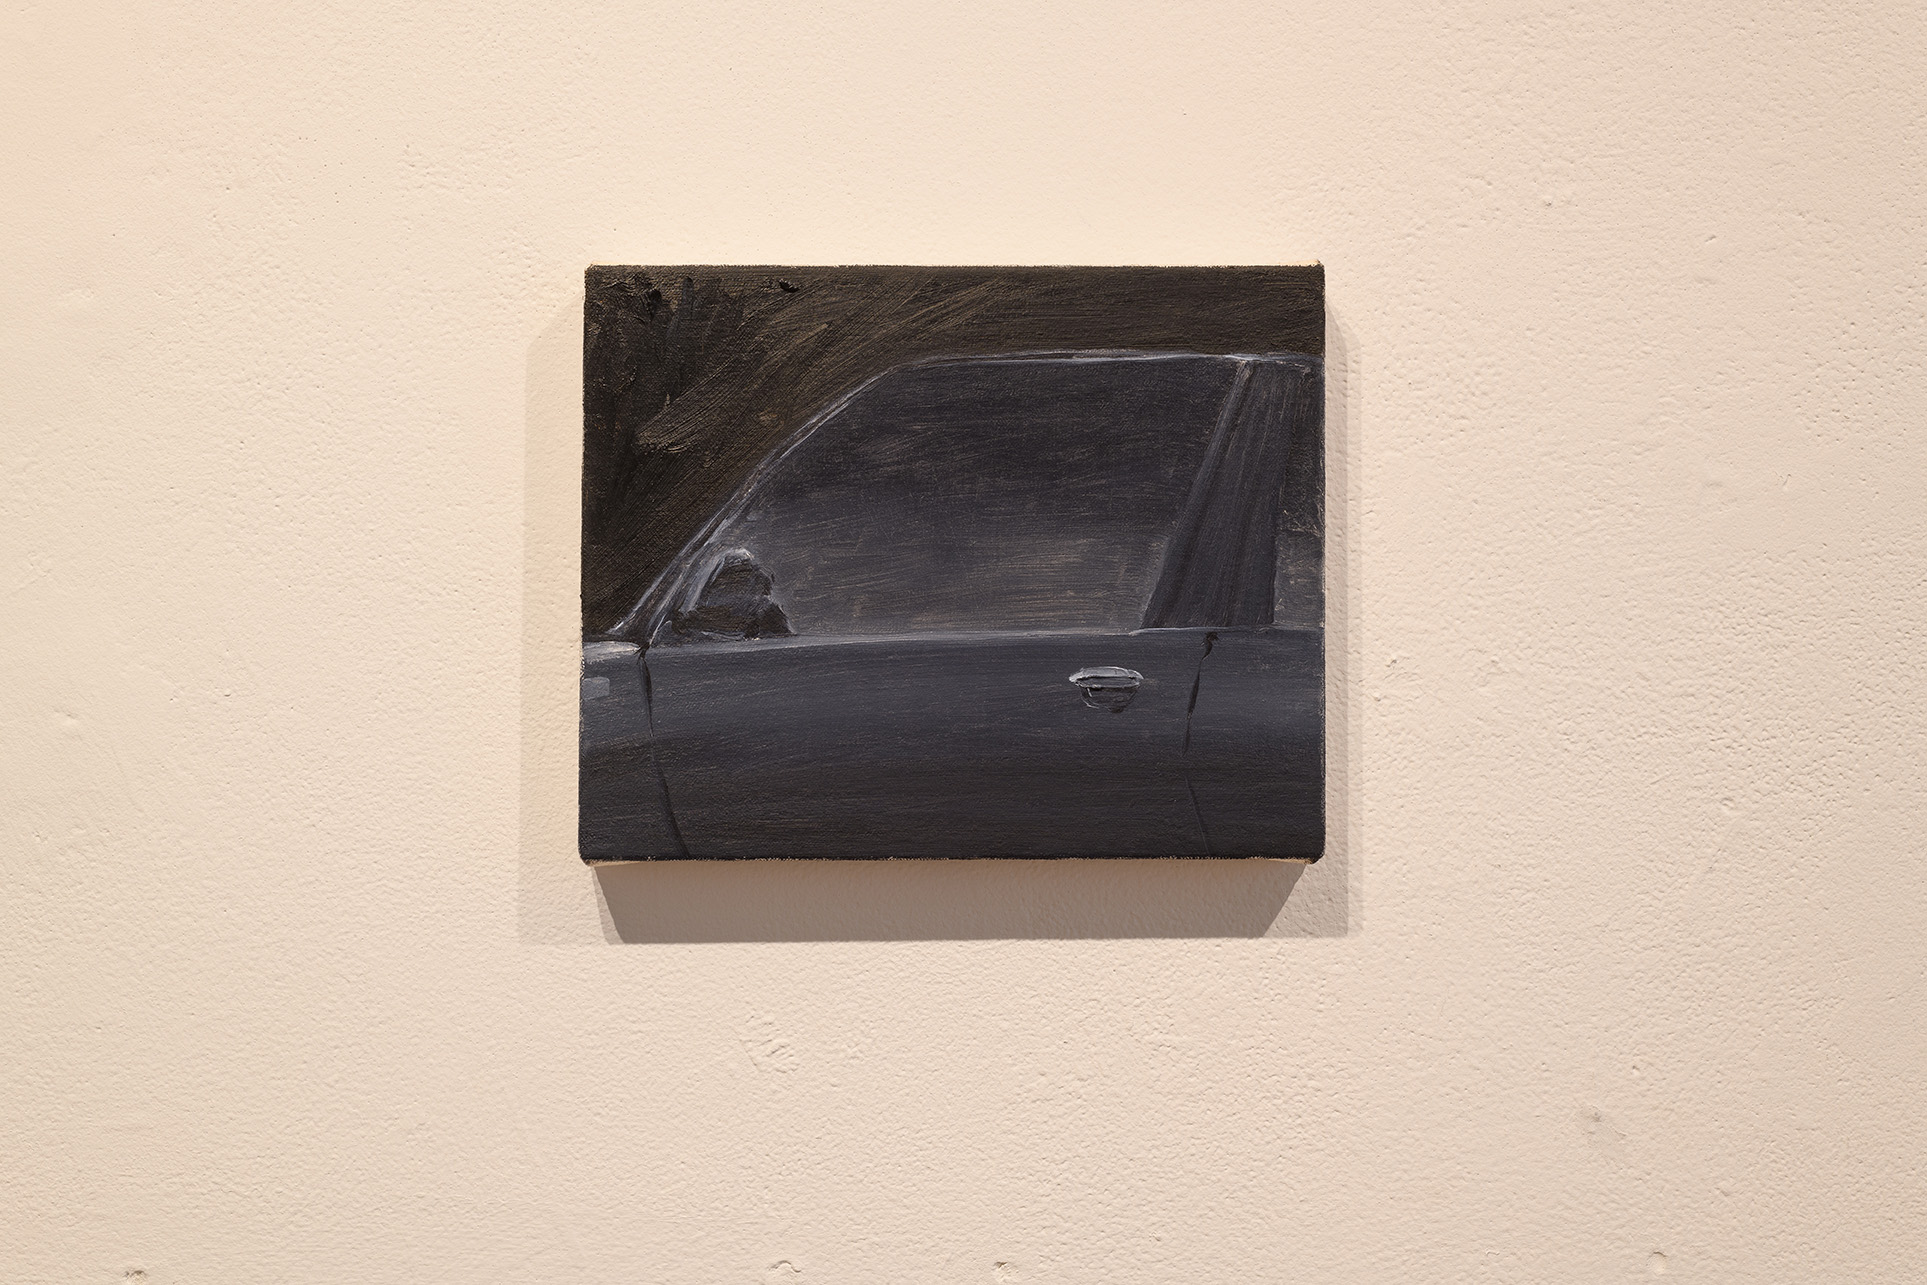 [A small painting of a car’s door and side window rendered in blacks, deep blues, and cool silver highlights surrounded by darkness.]